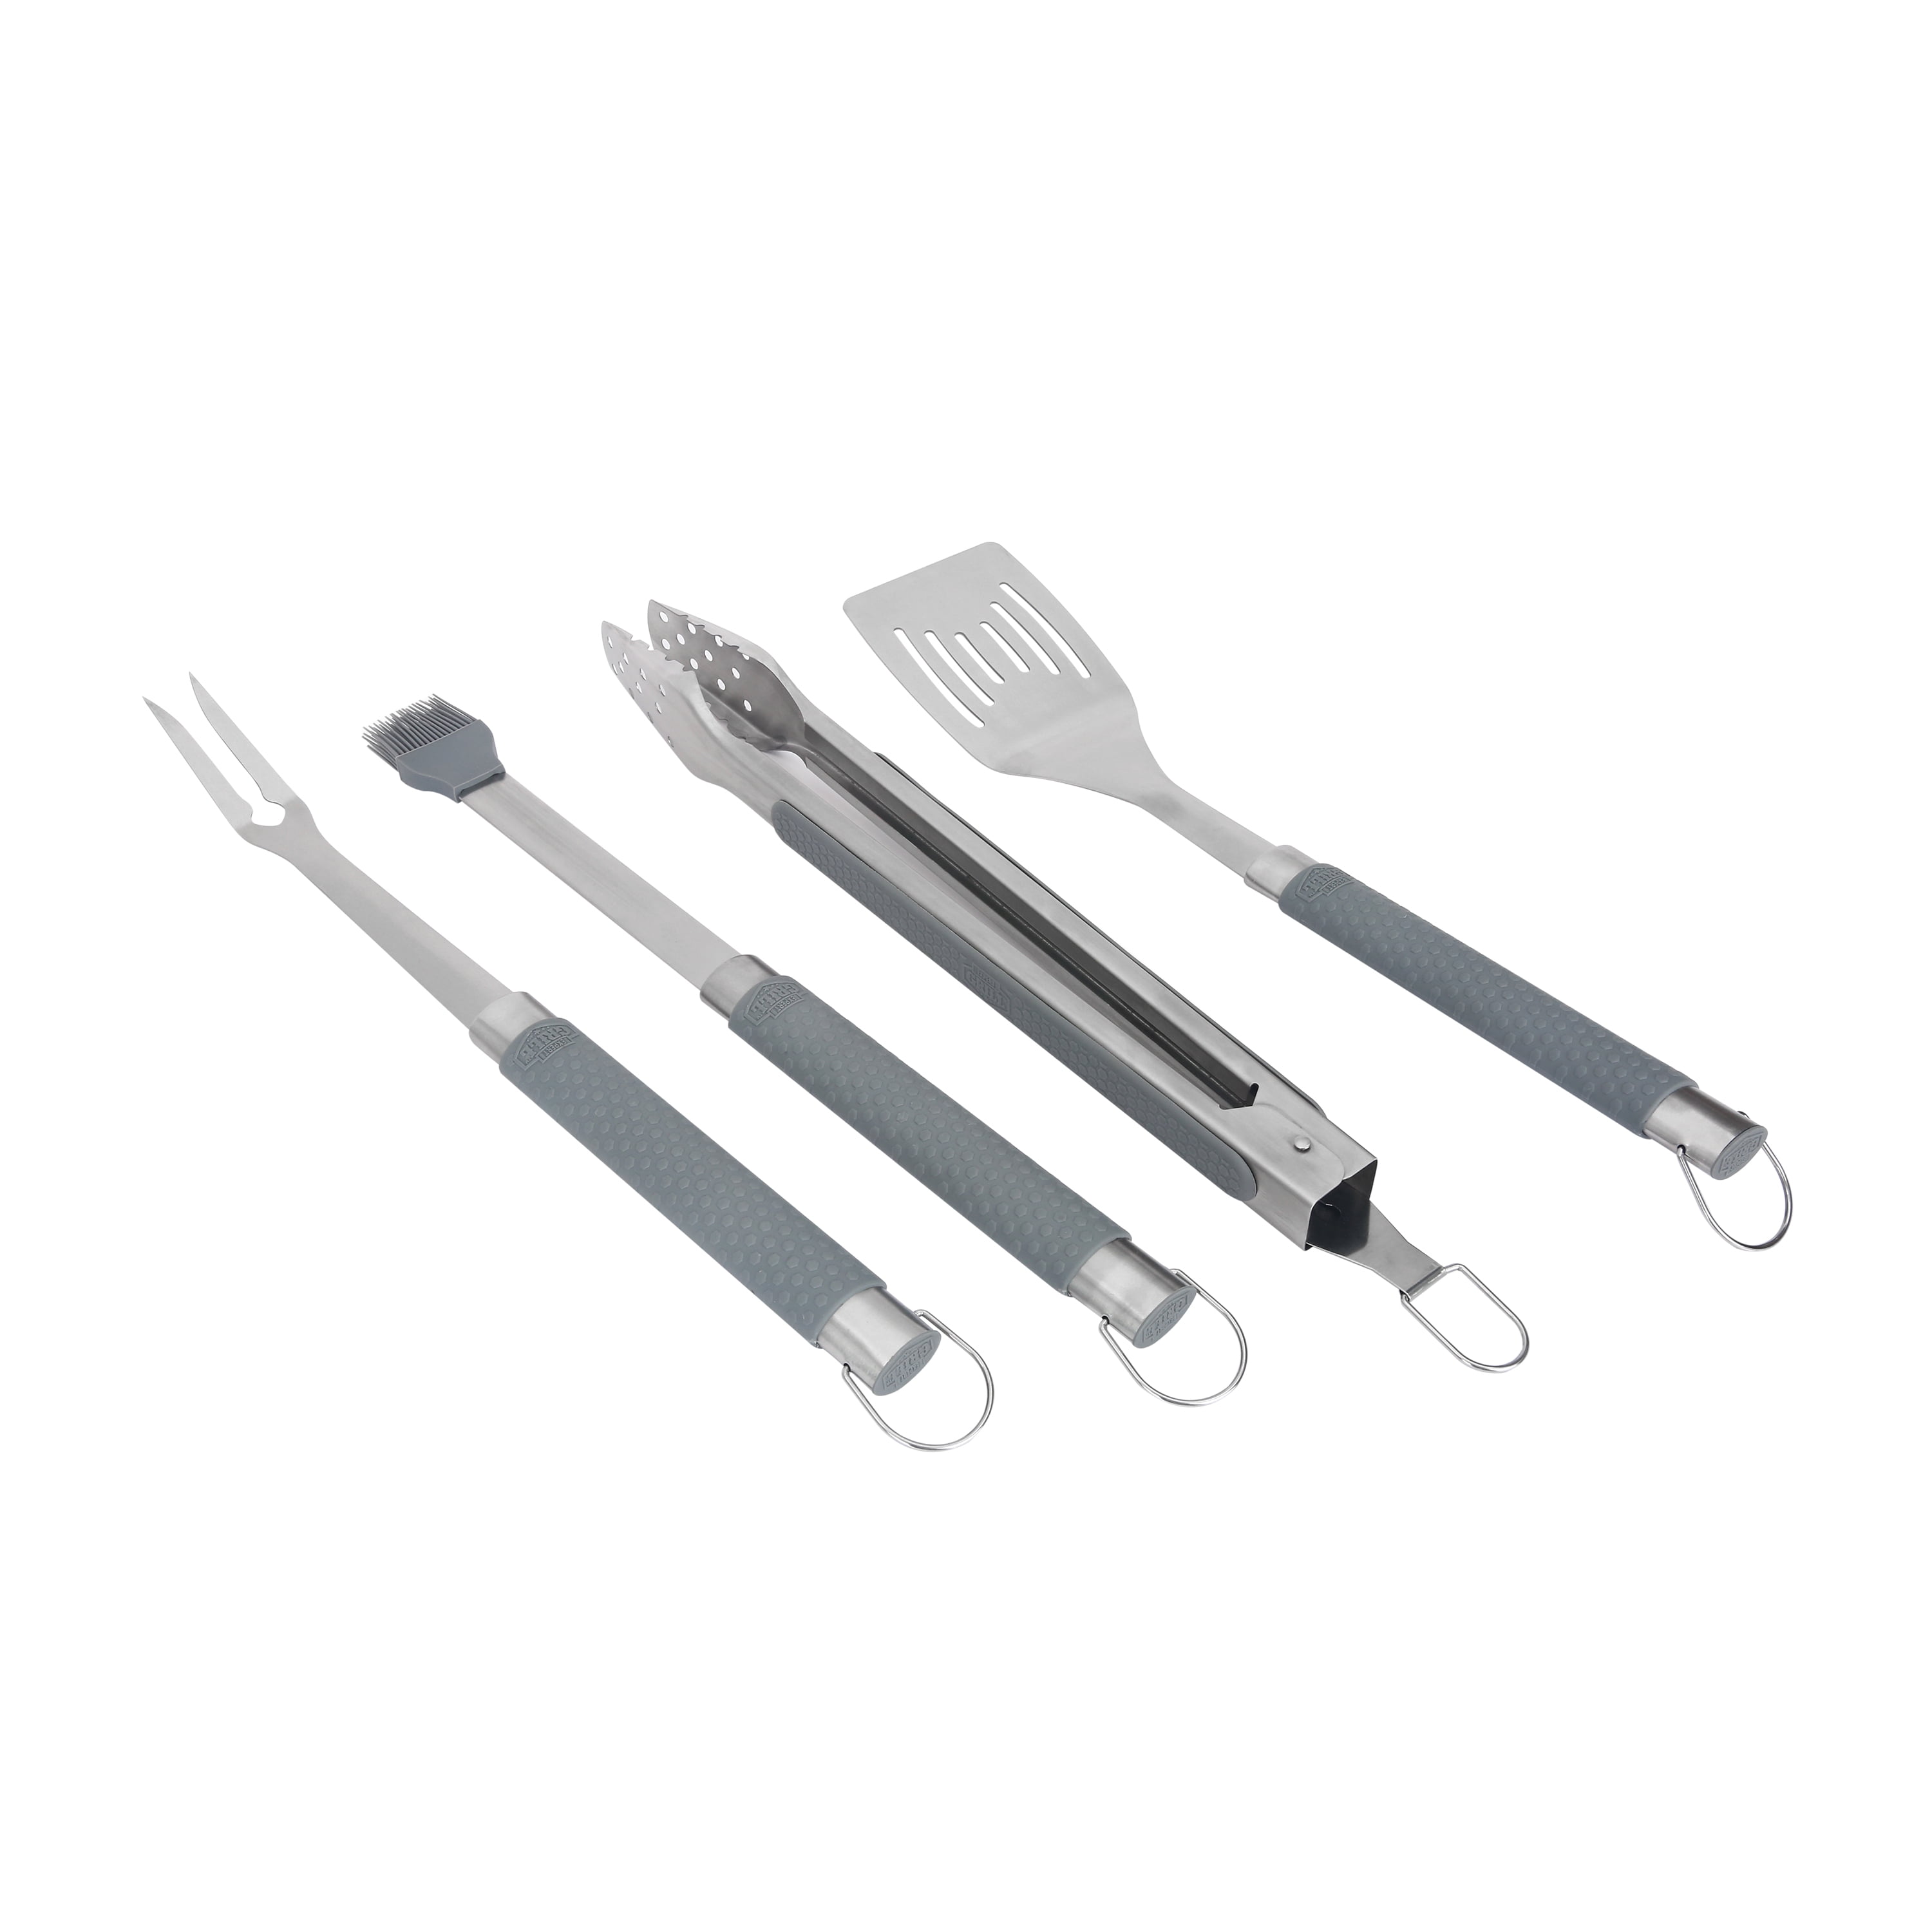 Expert Grill Stainless Steel 4-piece BBQ Tool Set with Soft Grip 